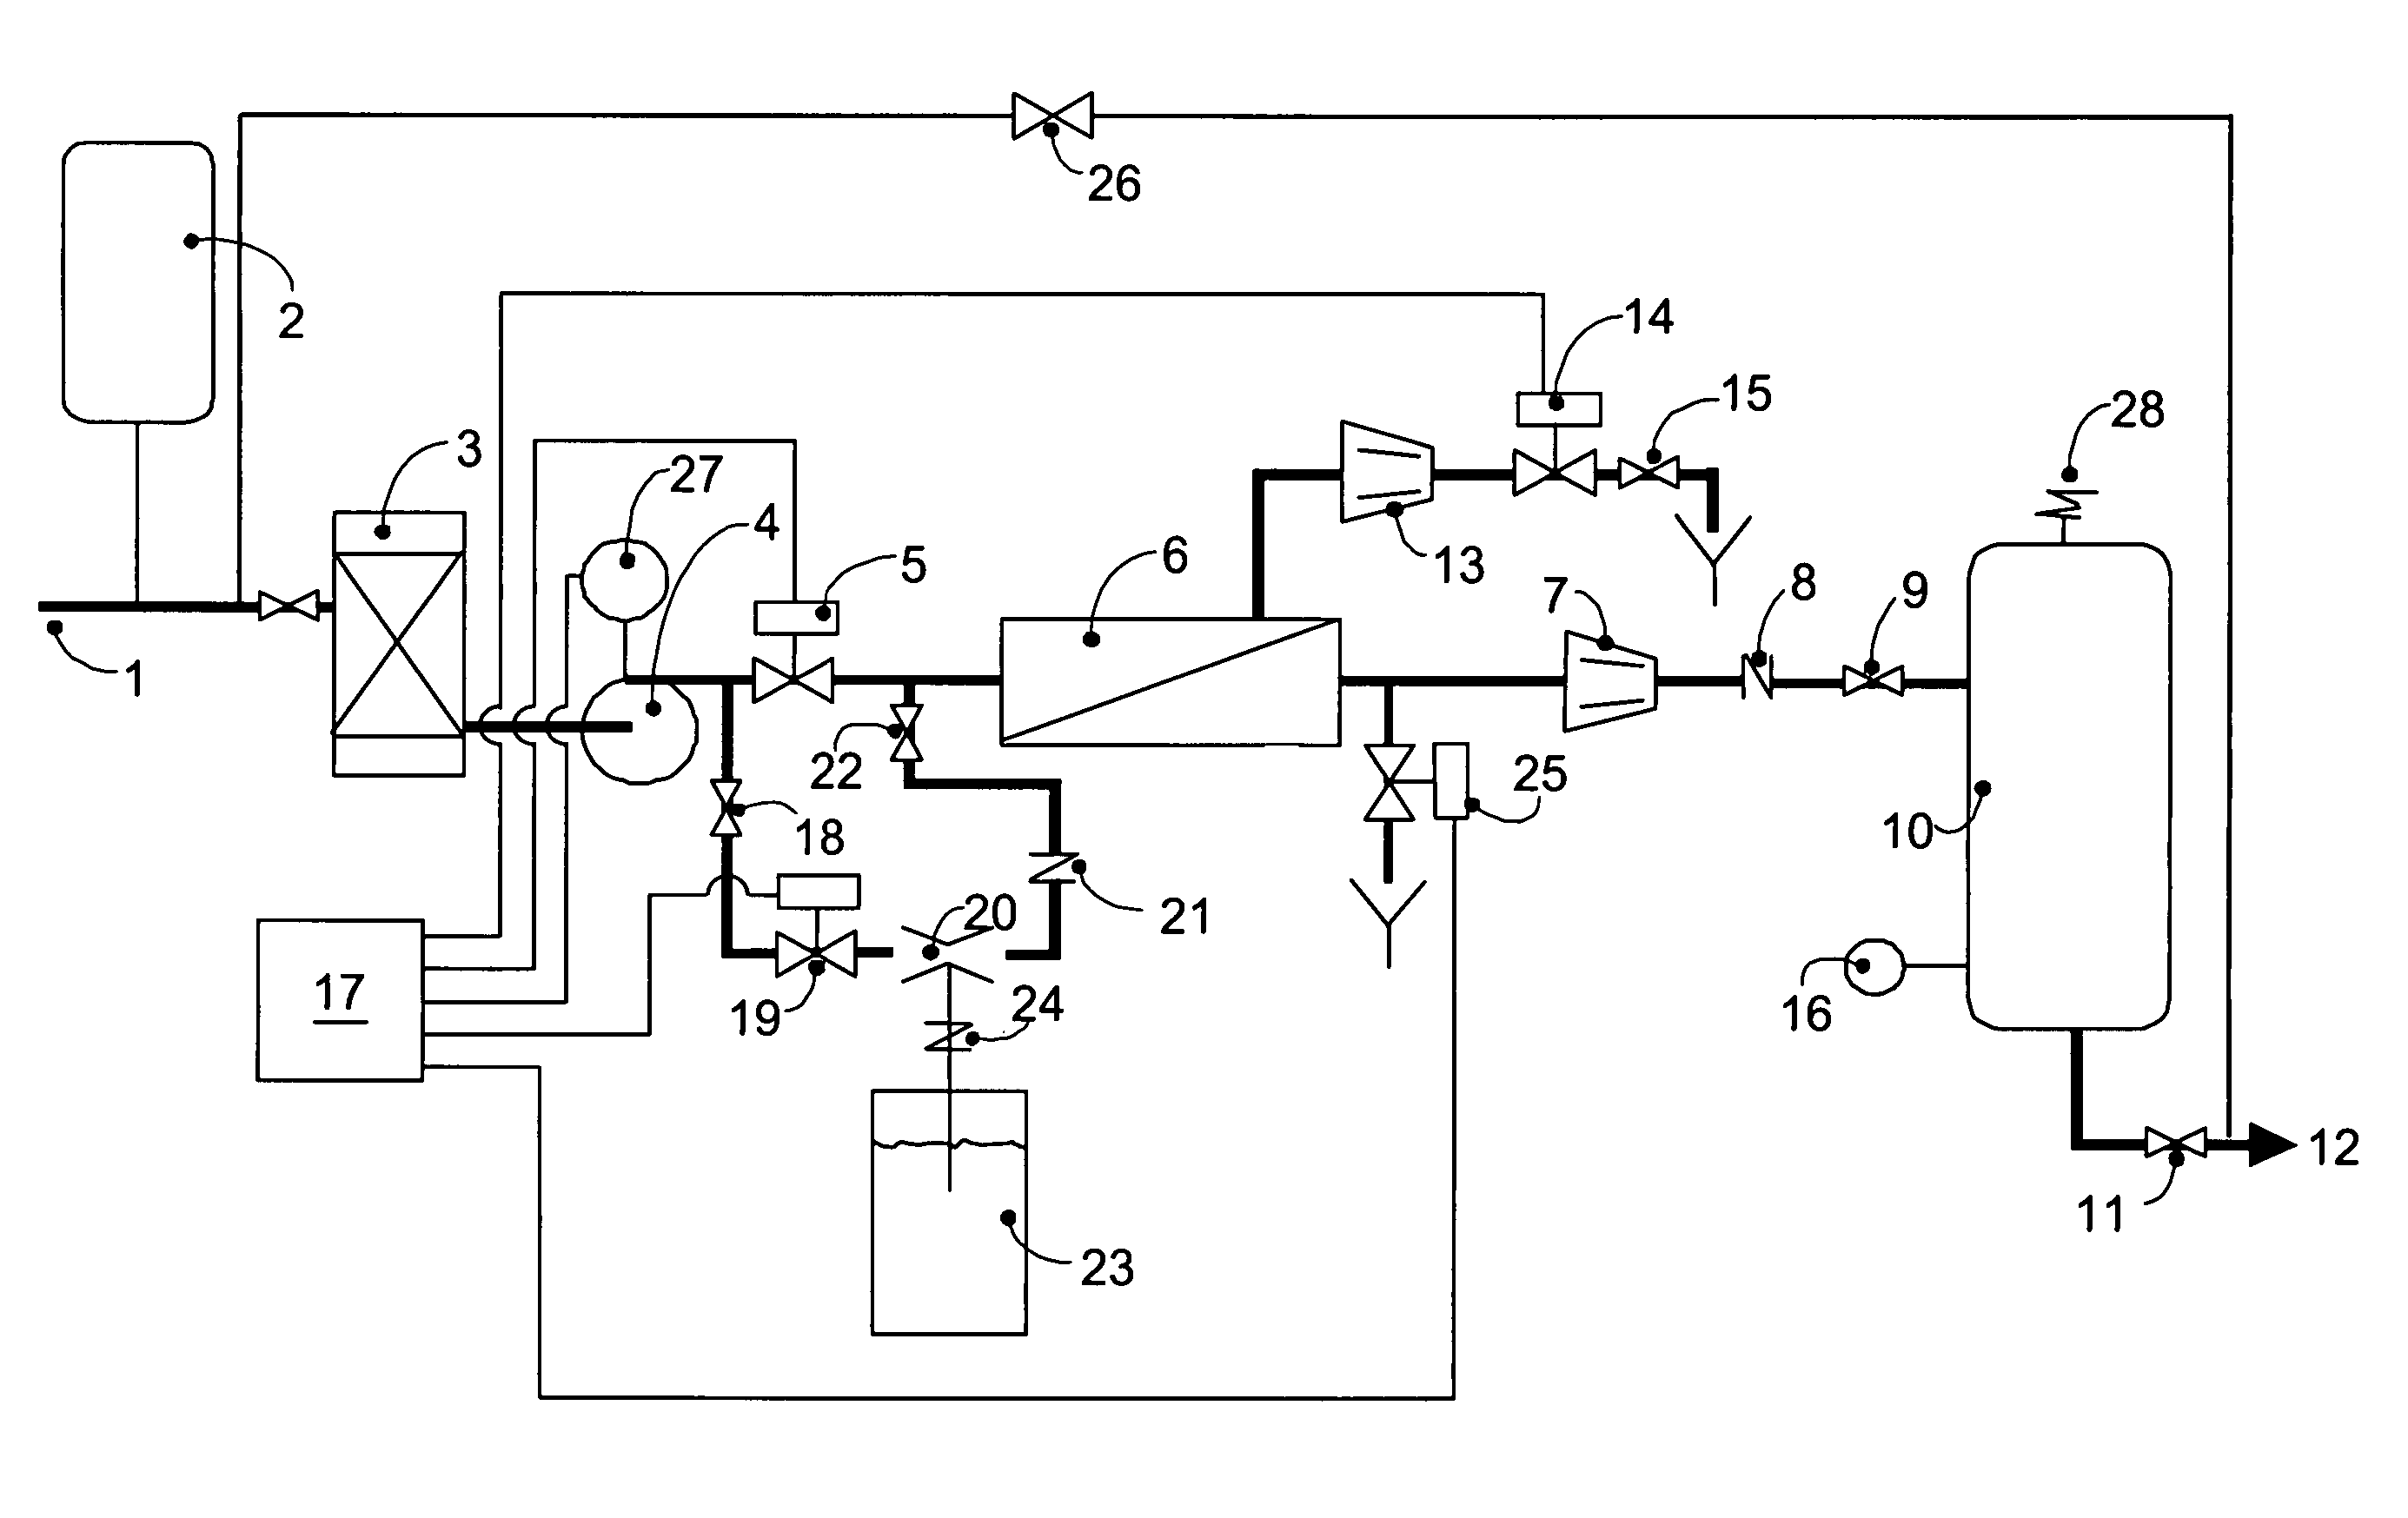 Nanofiltration system for water softening with internally staged spiral wound modules